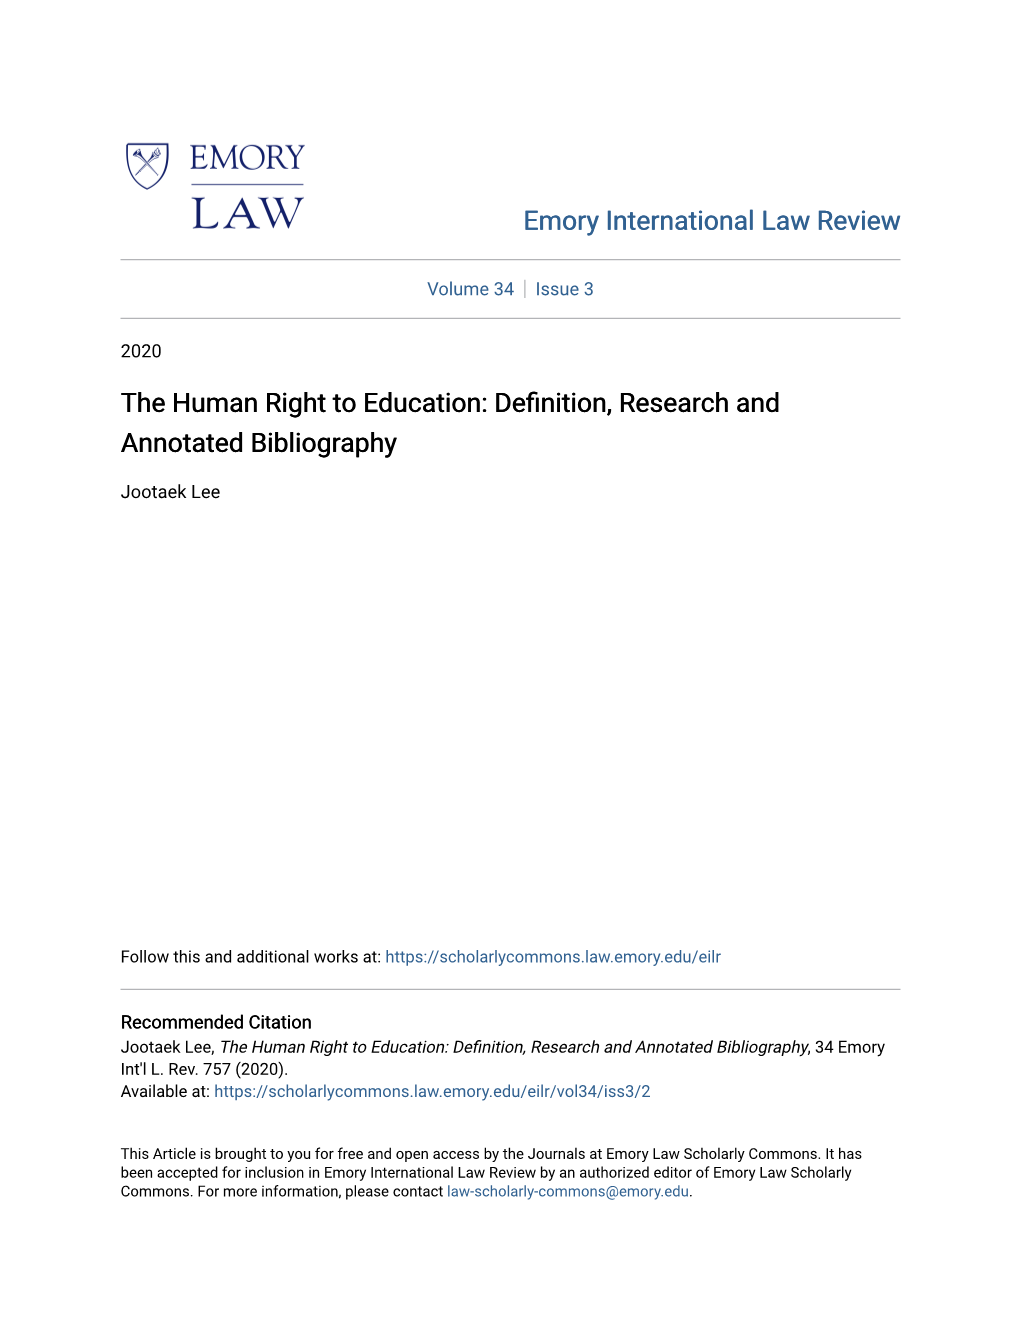 The Human Right to Education: Definition, Research and Annotated Bibliography